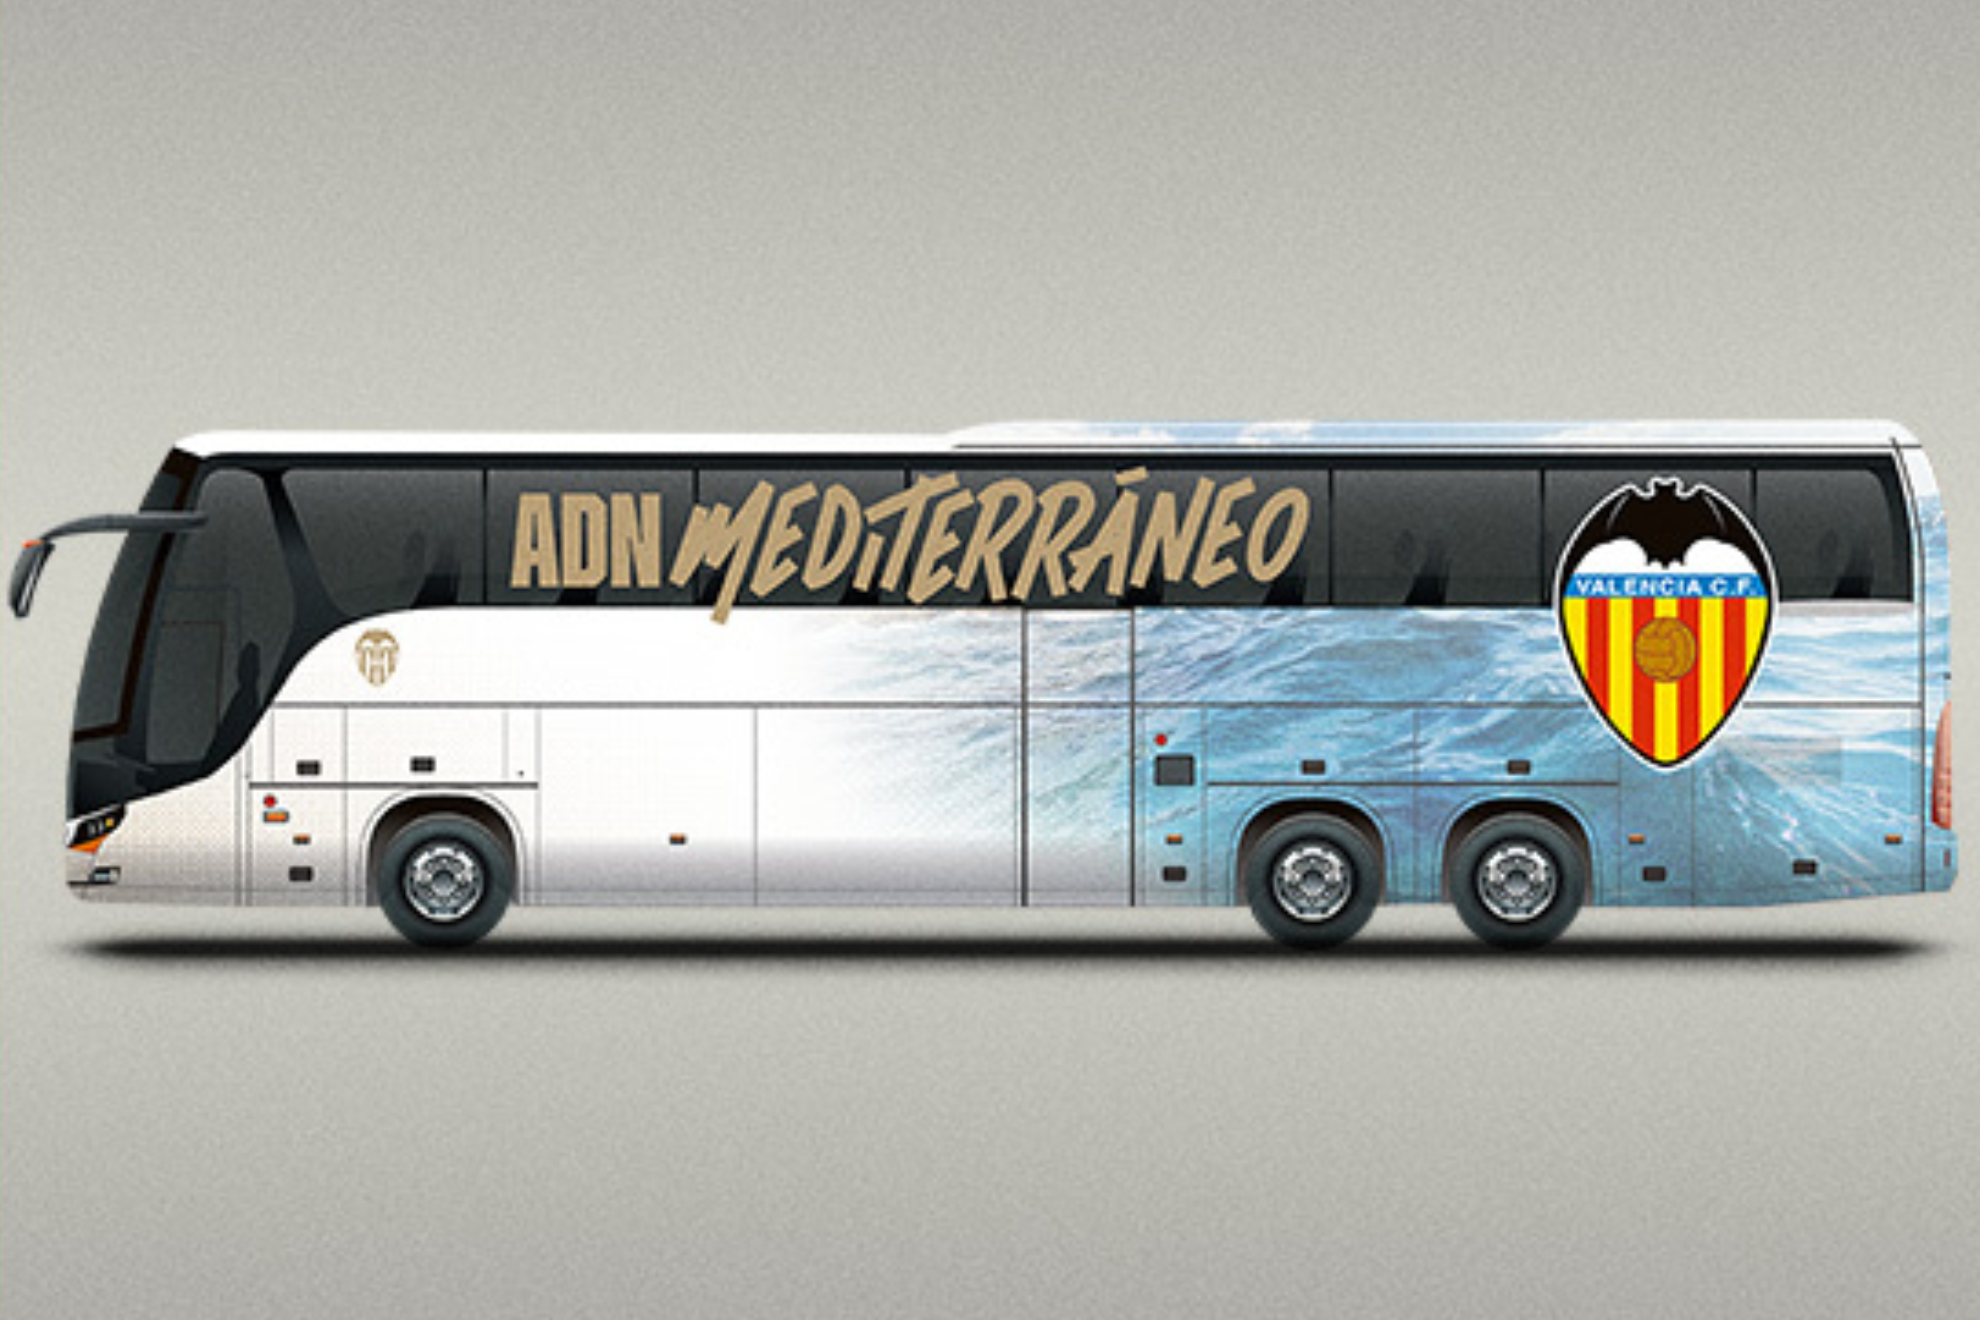 Ocean waves will decorate the Valencia CF bus